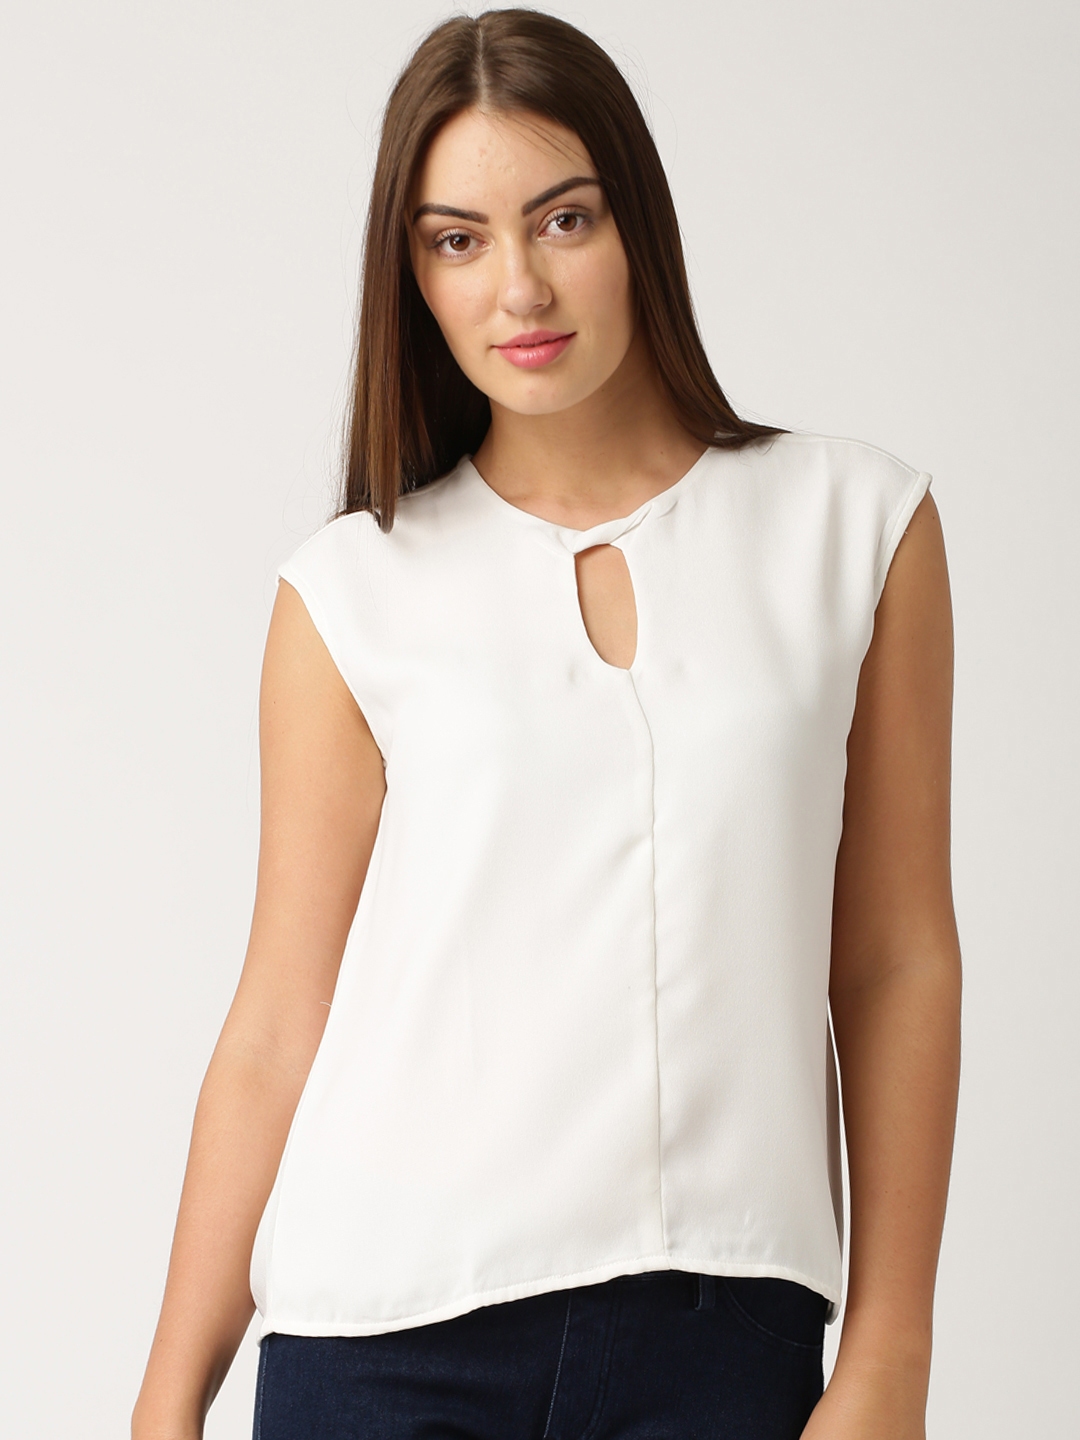 Buy ETHER White Polyester Top - Tops for Women 1297692 | Myntra